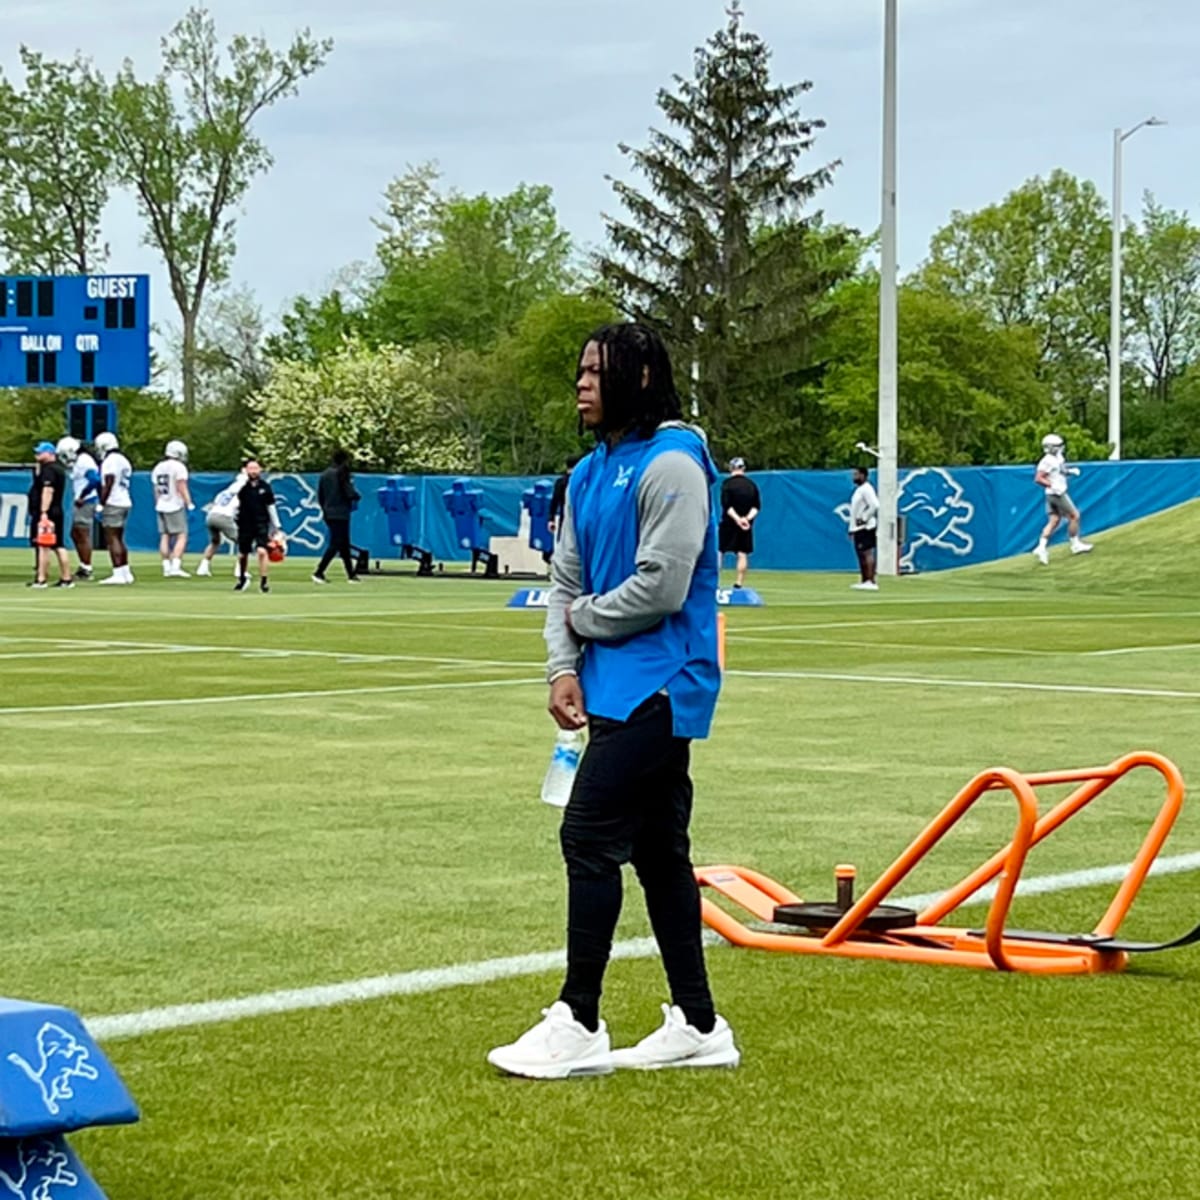 I think Sewell will be all-pro this year #detroitlions #detroit #lions